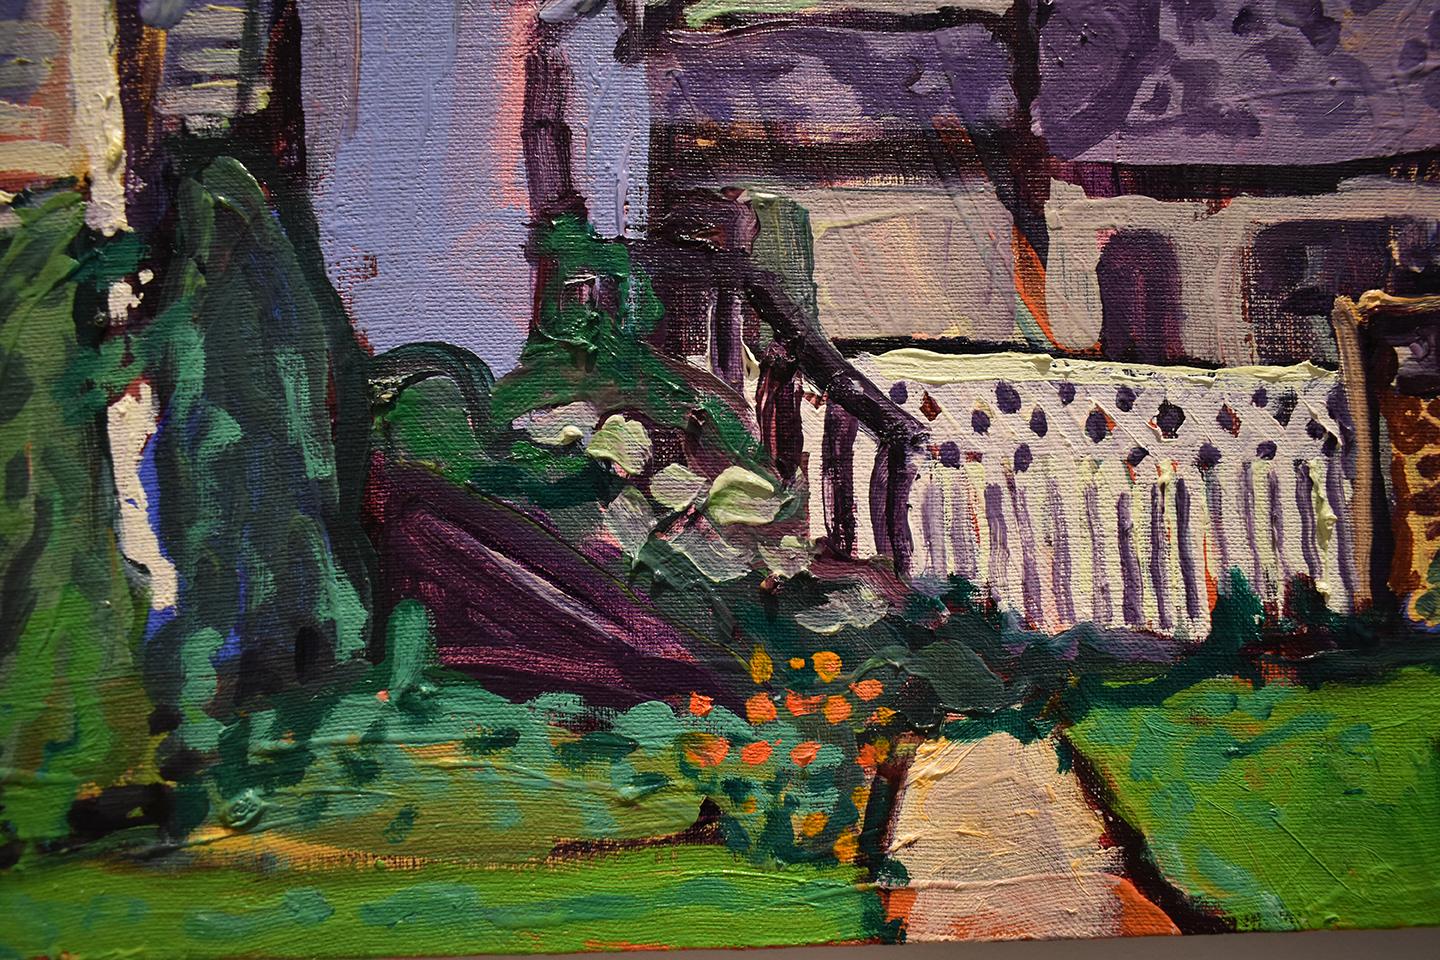 16 3rd St. Athens NY (Oil on Linen Town Street Landscape in Vivid Color Palette) - Contemporary Painting by Dan Rupe